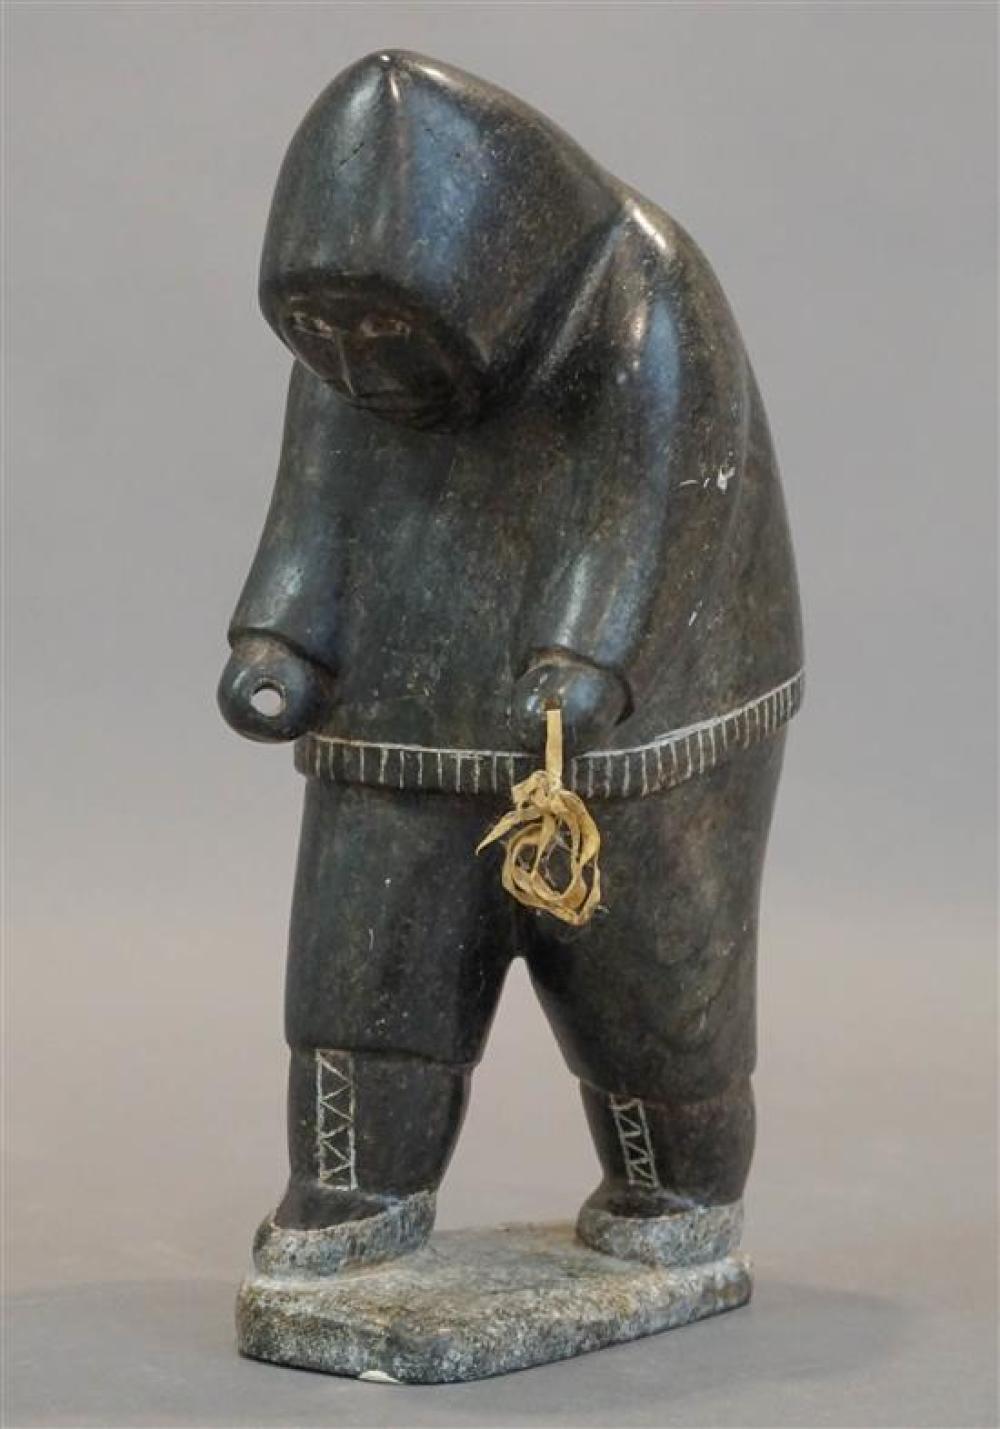 INUIT SCULPTURE OF A TRAVELING